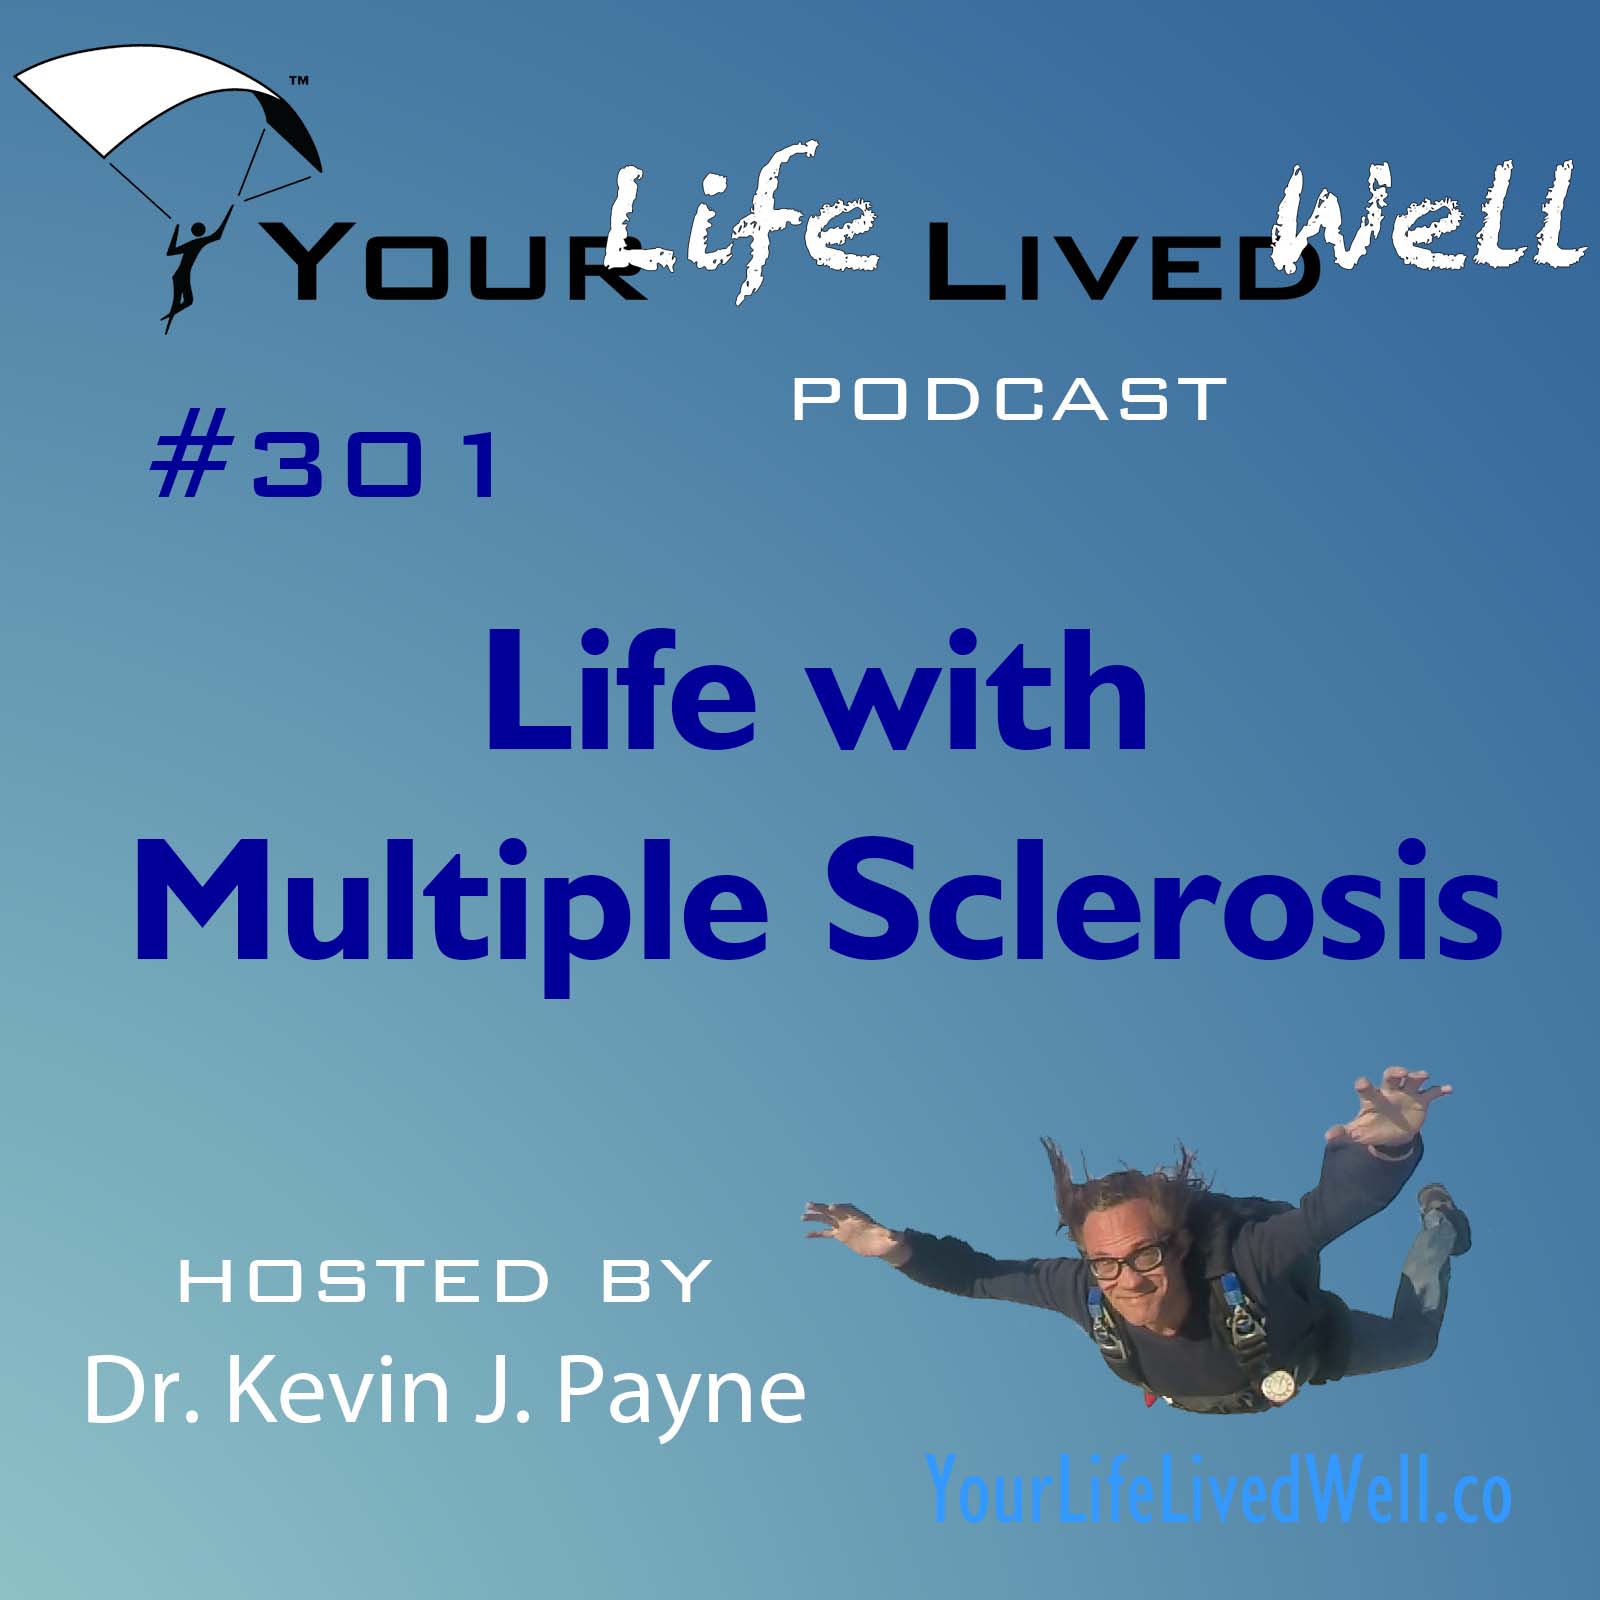 Life with Multiple Sclerosis